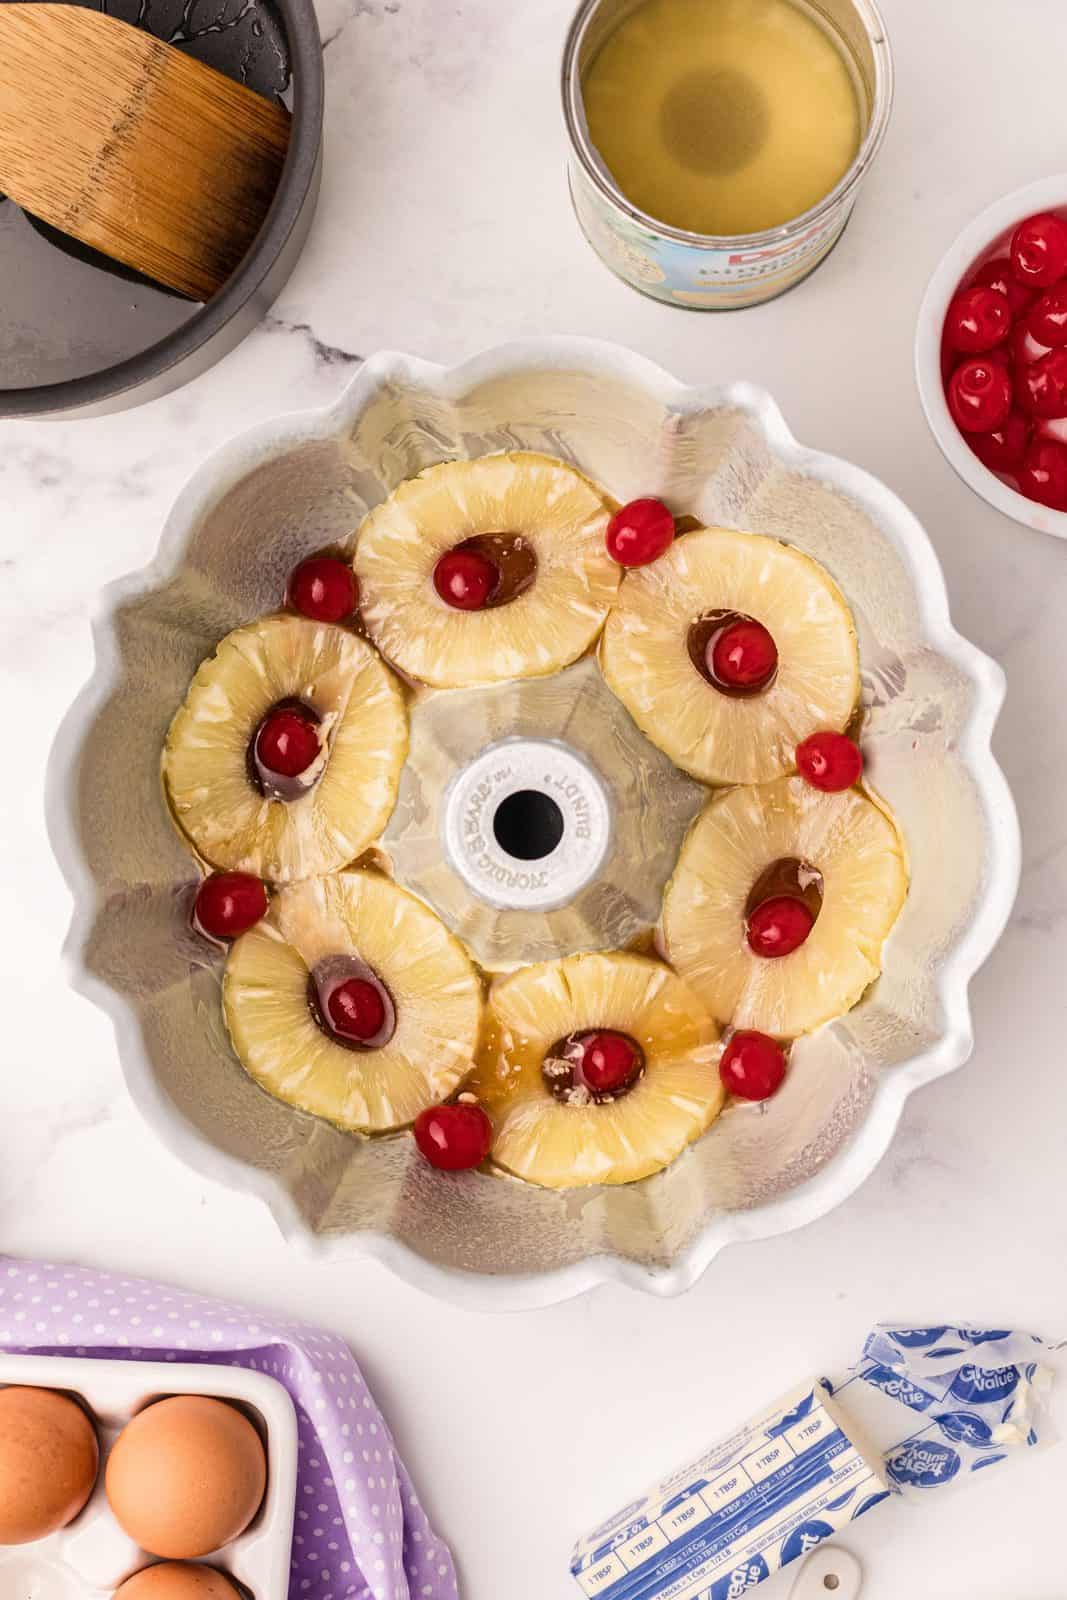 Pineapple rings and cherries arranged over brown sugar and butter in bundt pan.